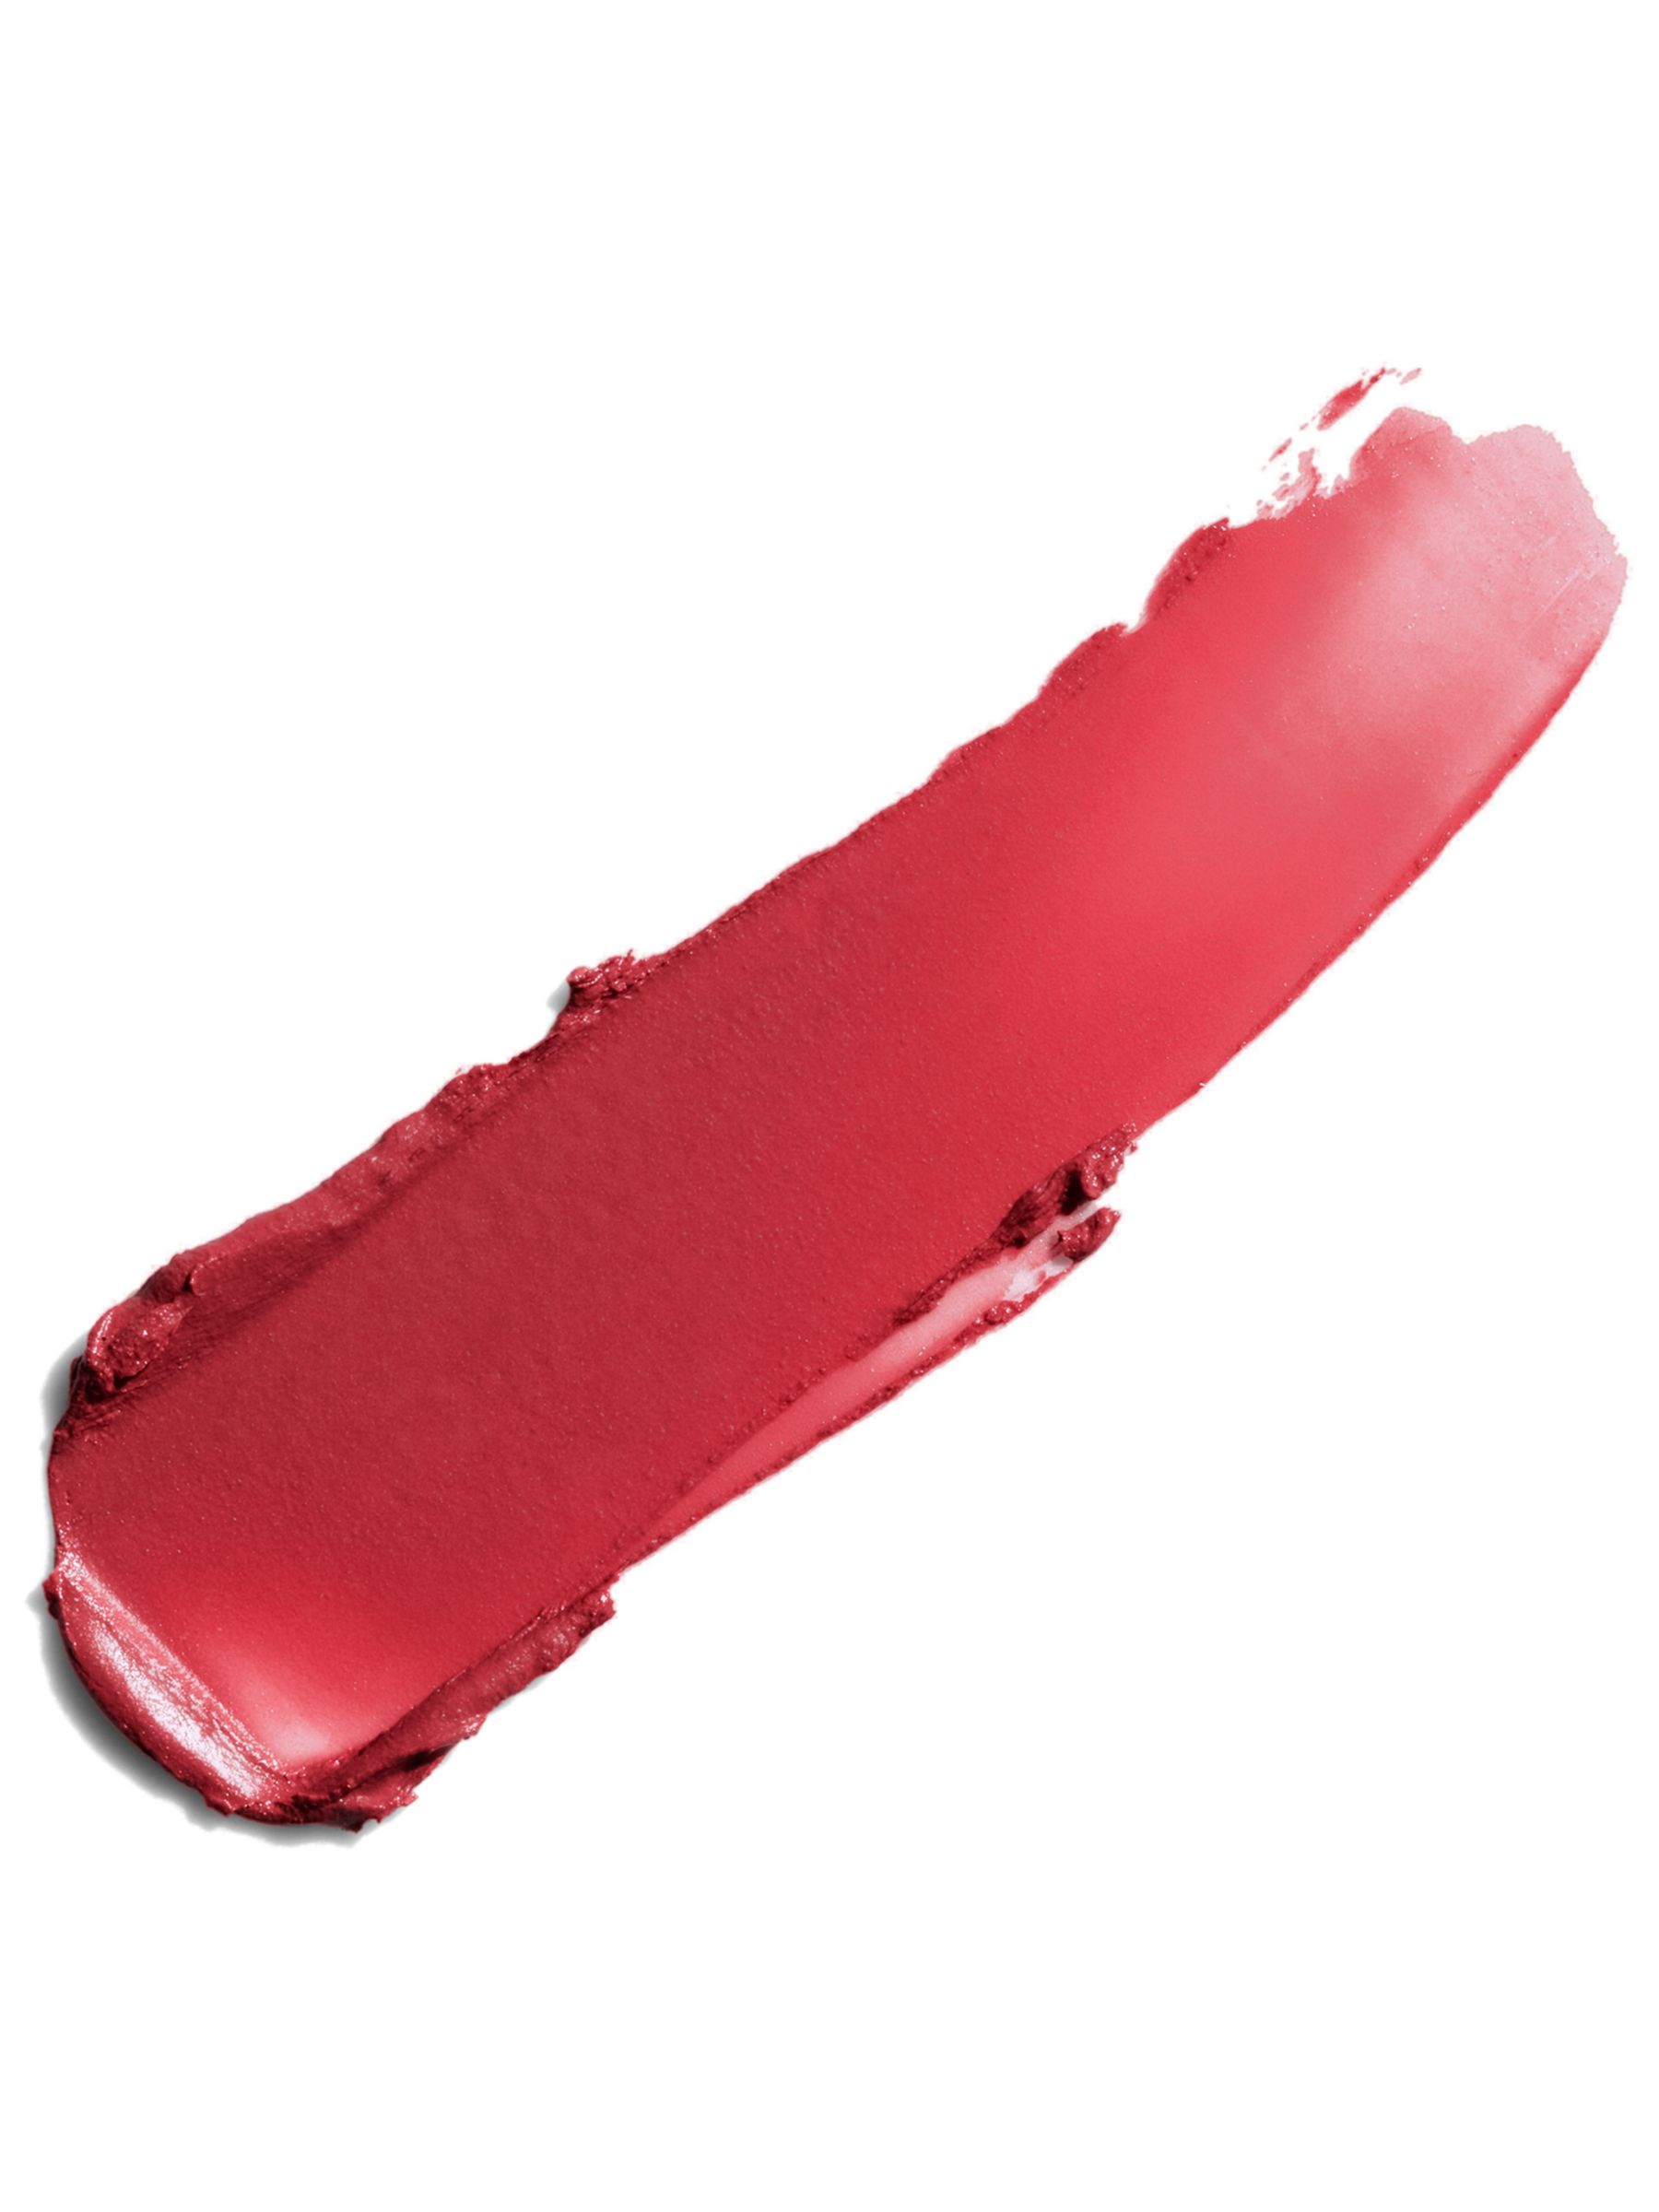 Clinique Dramatically Different Lipstick at John Lewis & Partners